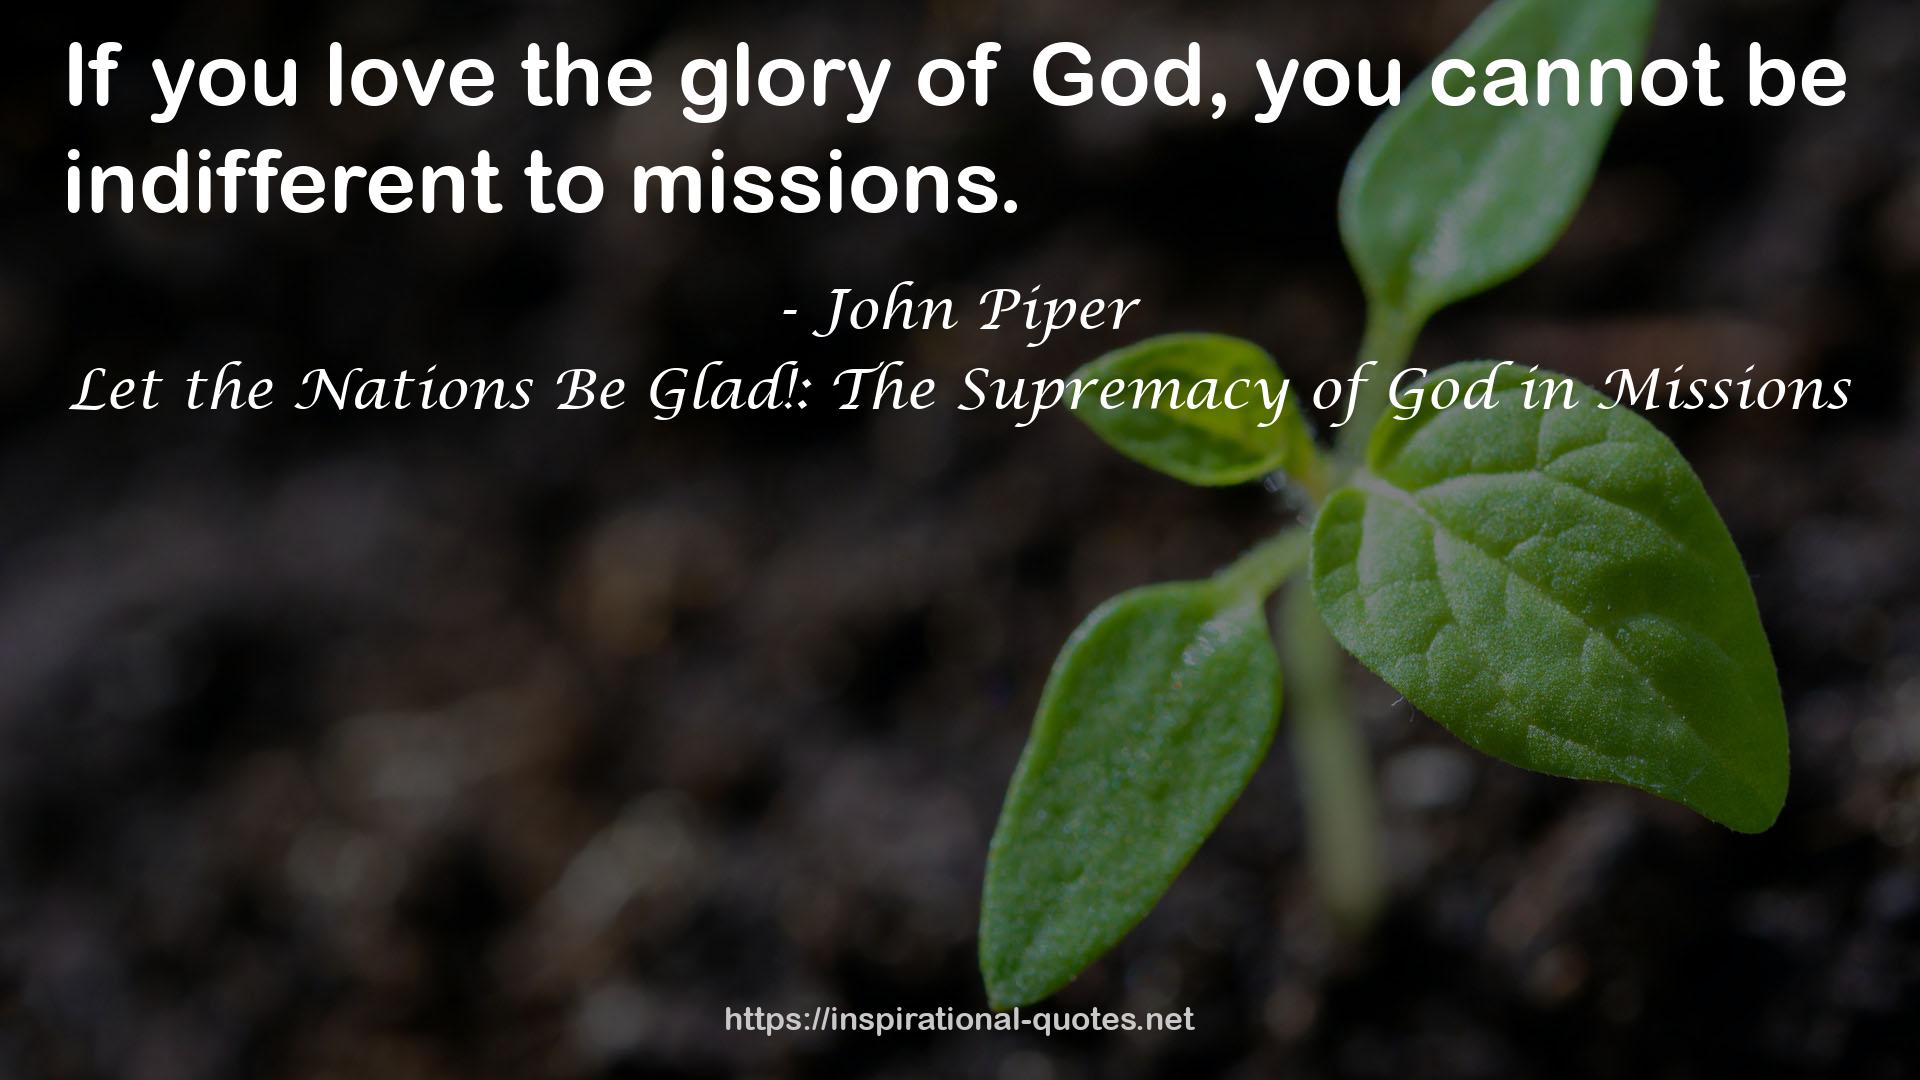 Let the Nations Be Glad!: The Supremacy of God in Missions QUOTES